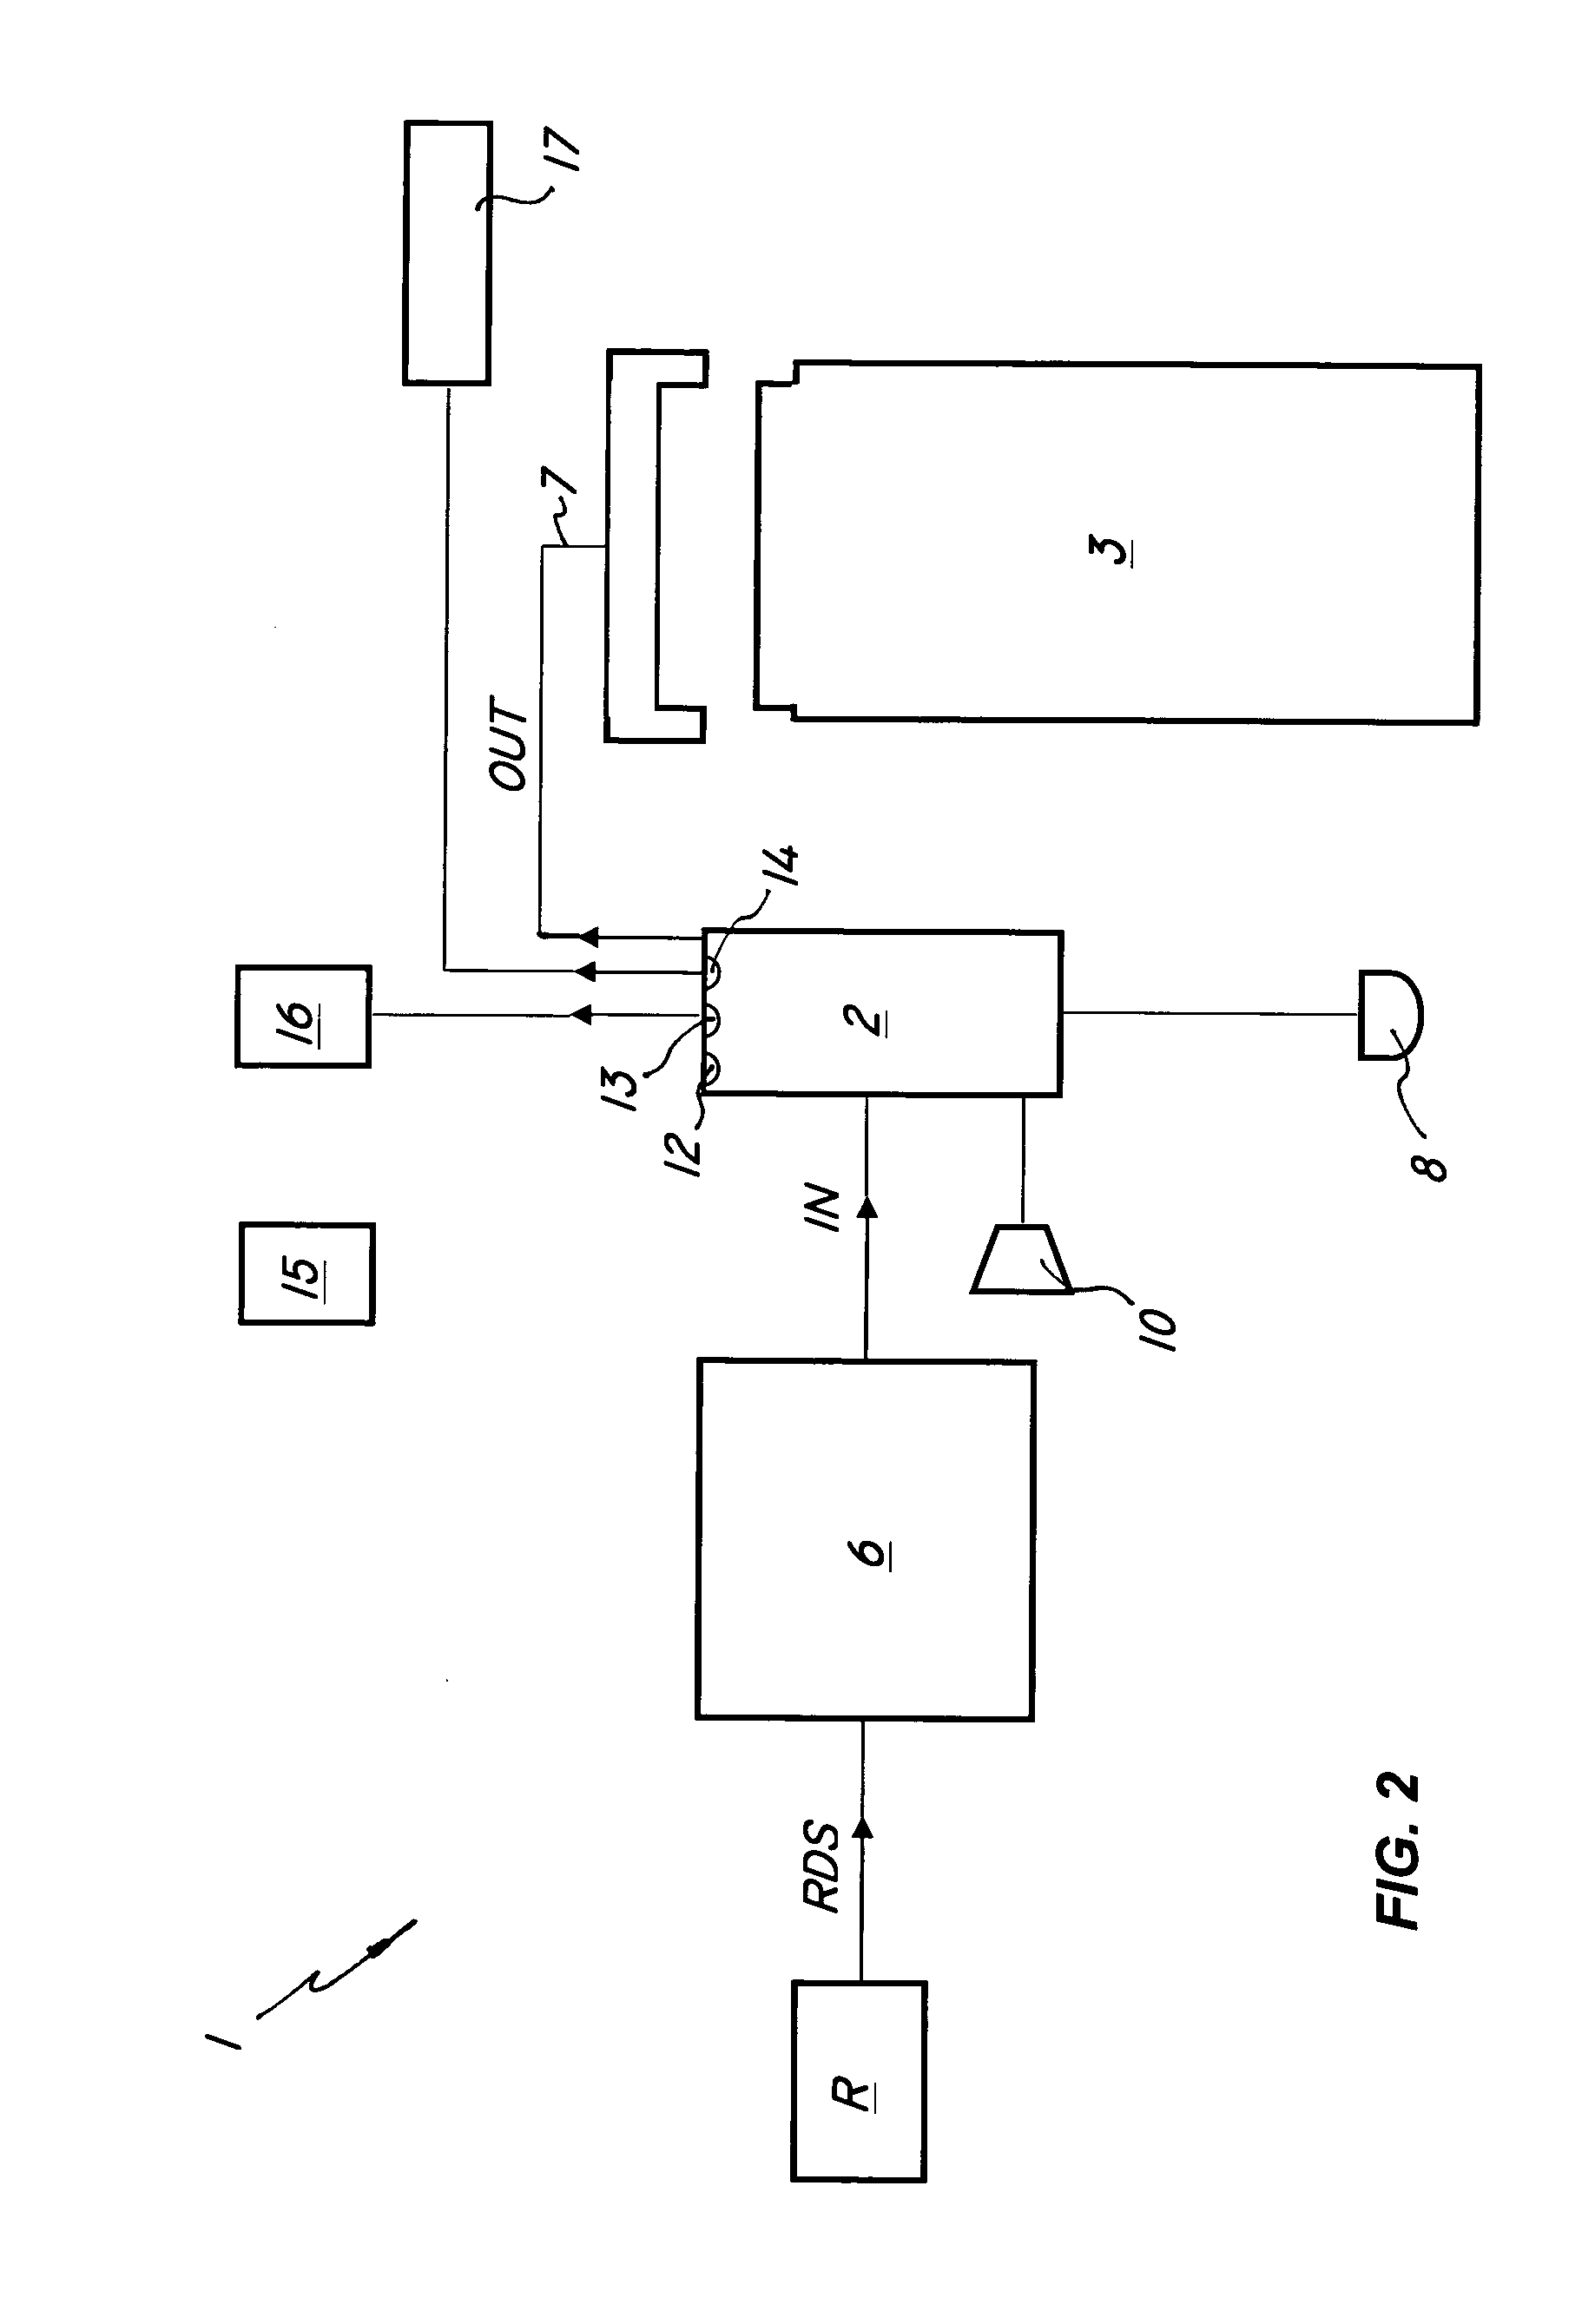 Electronic device for detection and storage of rds signal data